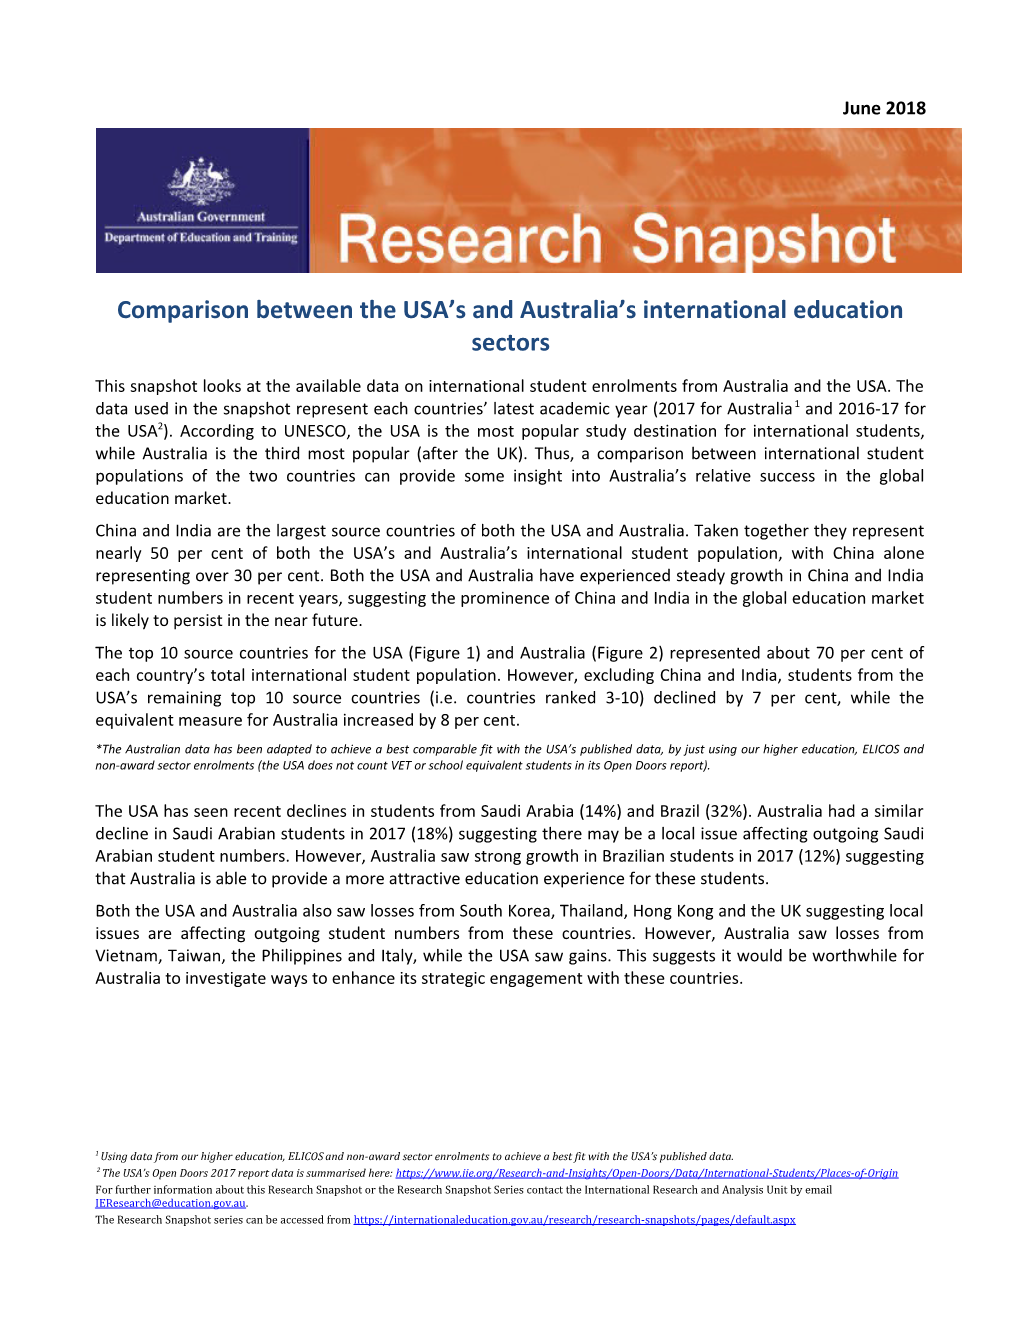 Comparison Between the USA S and Australia S International Education Sectors